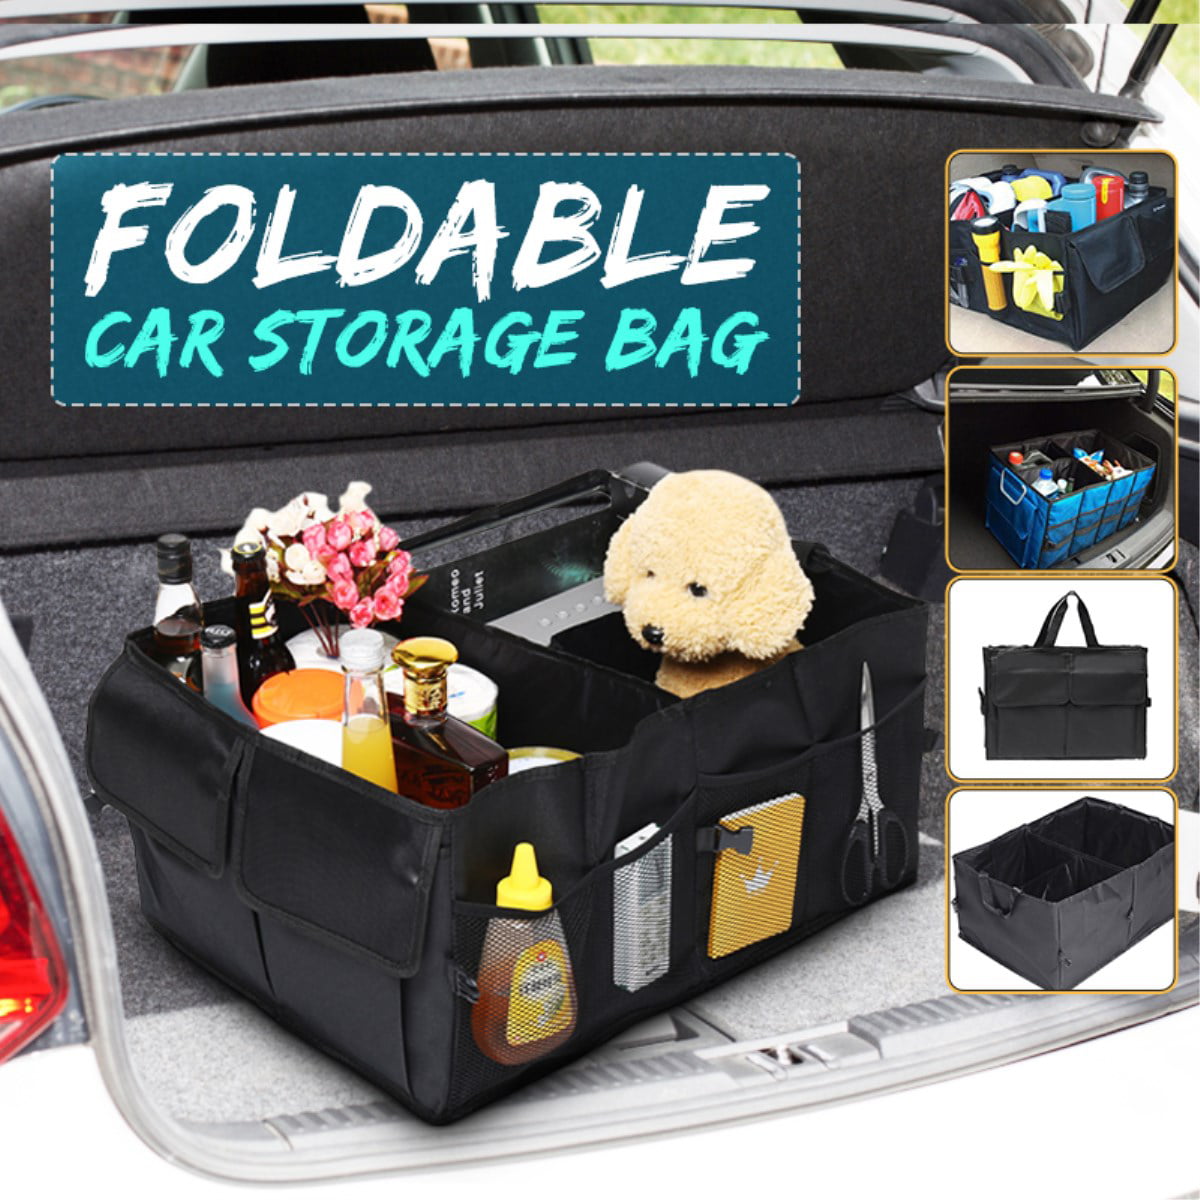 Foldable Car Auto Rear Trunk Storage Bag Pocket Cage Organizer Cooler Pouch New 